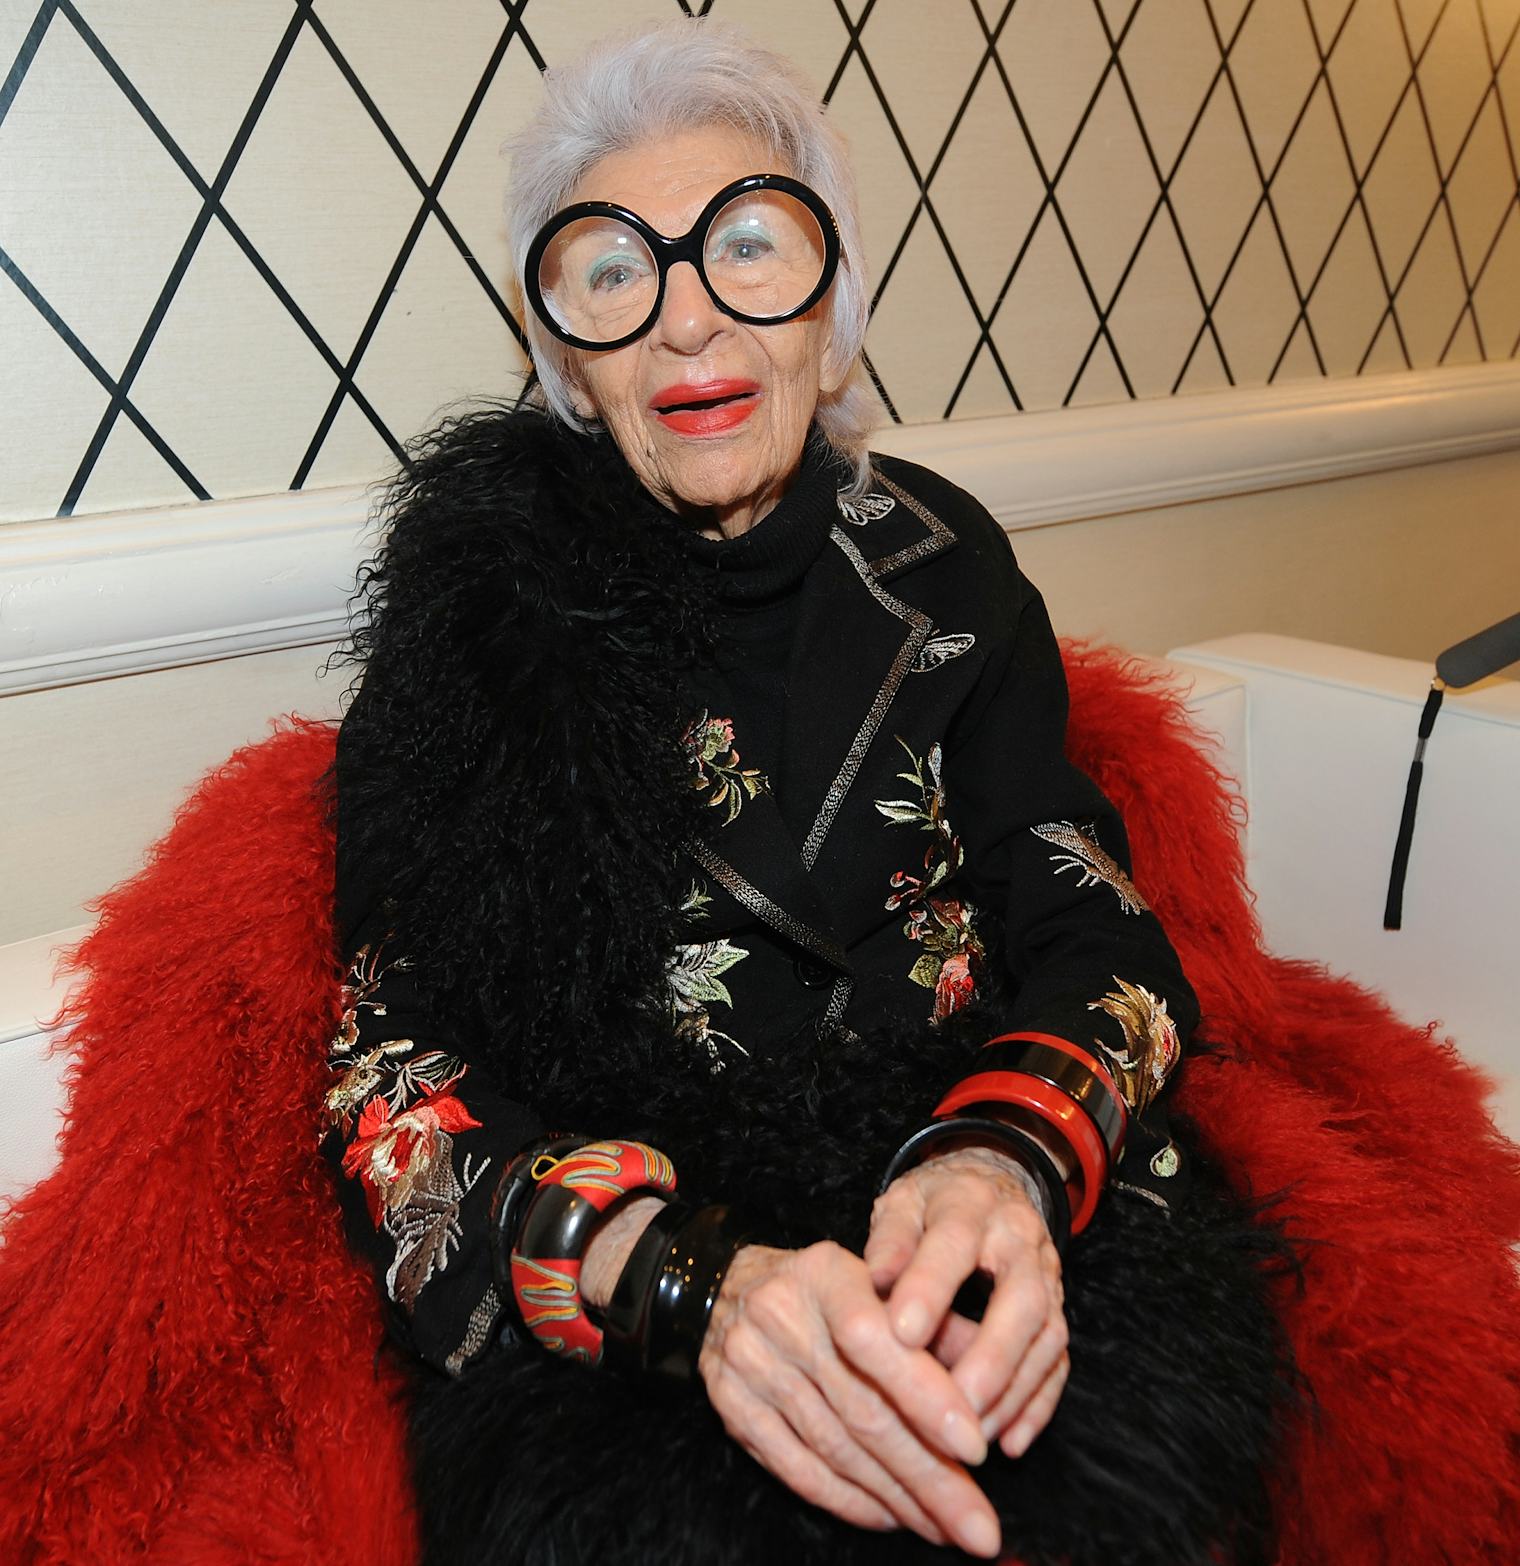 15 Iris Apfel Quotes About Personal Style & Finding Yourself Through It